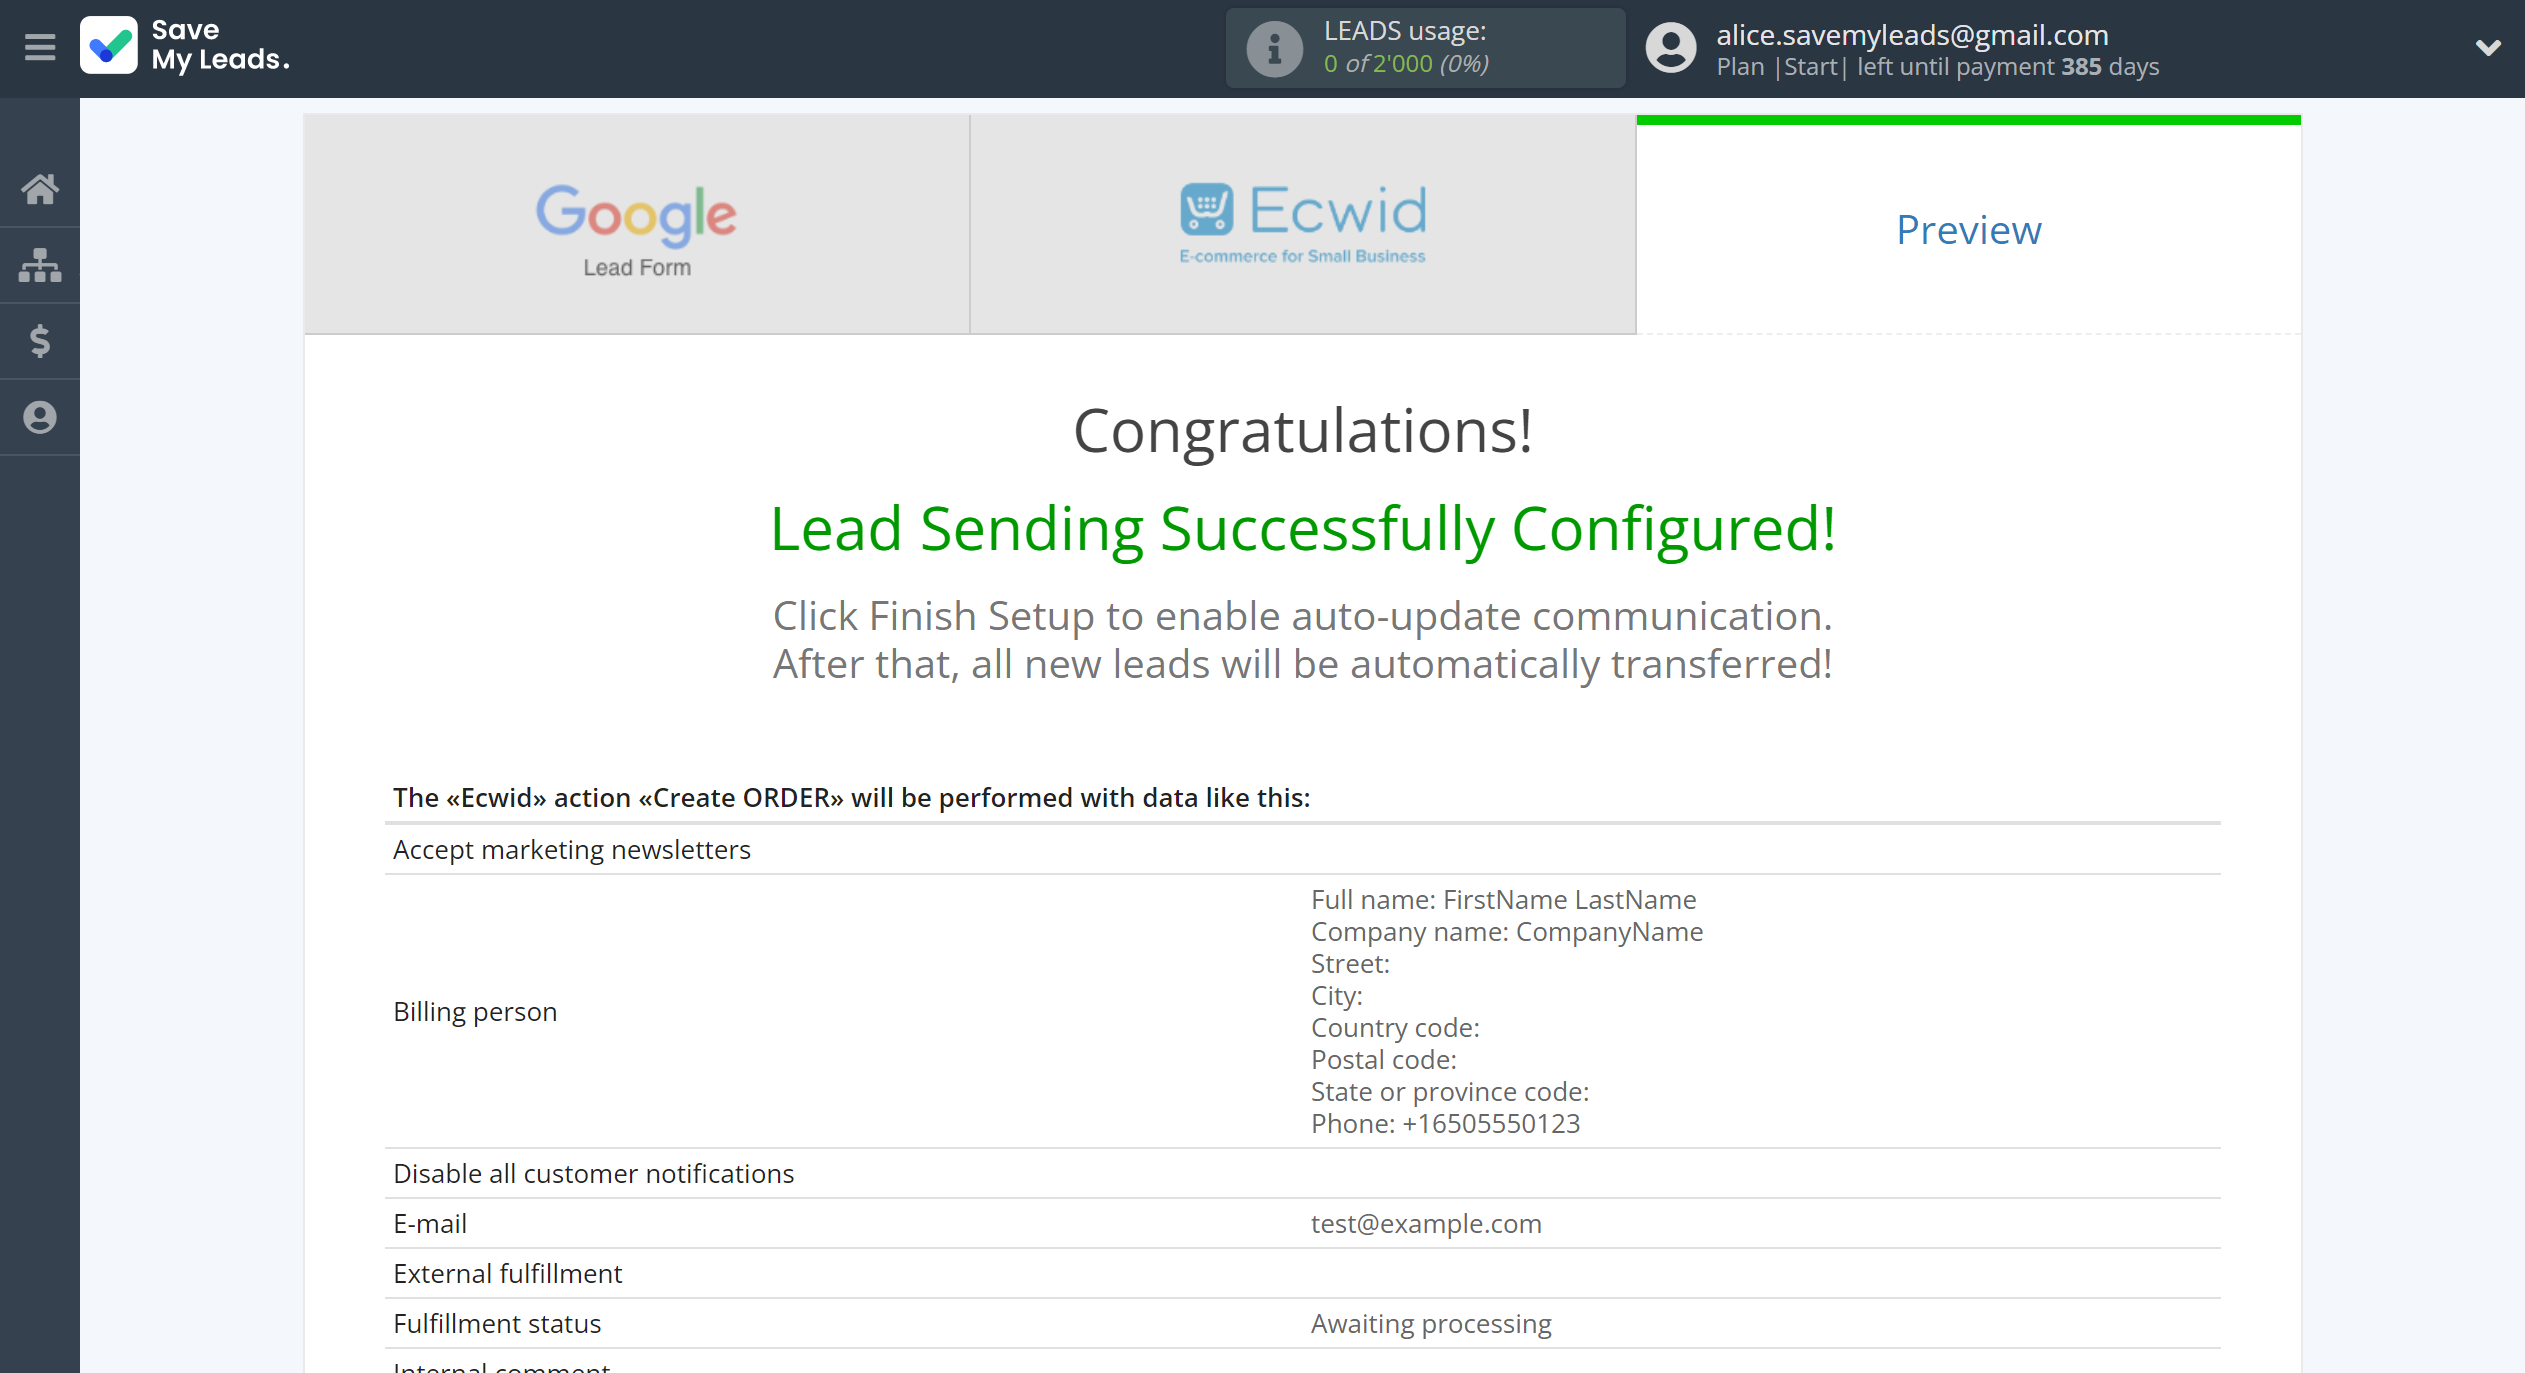 How to Connect Google Lead Form with Ecwid Create Order | Test data